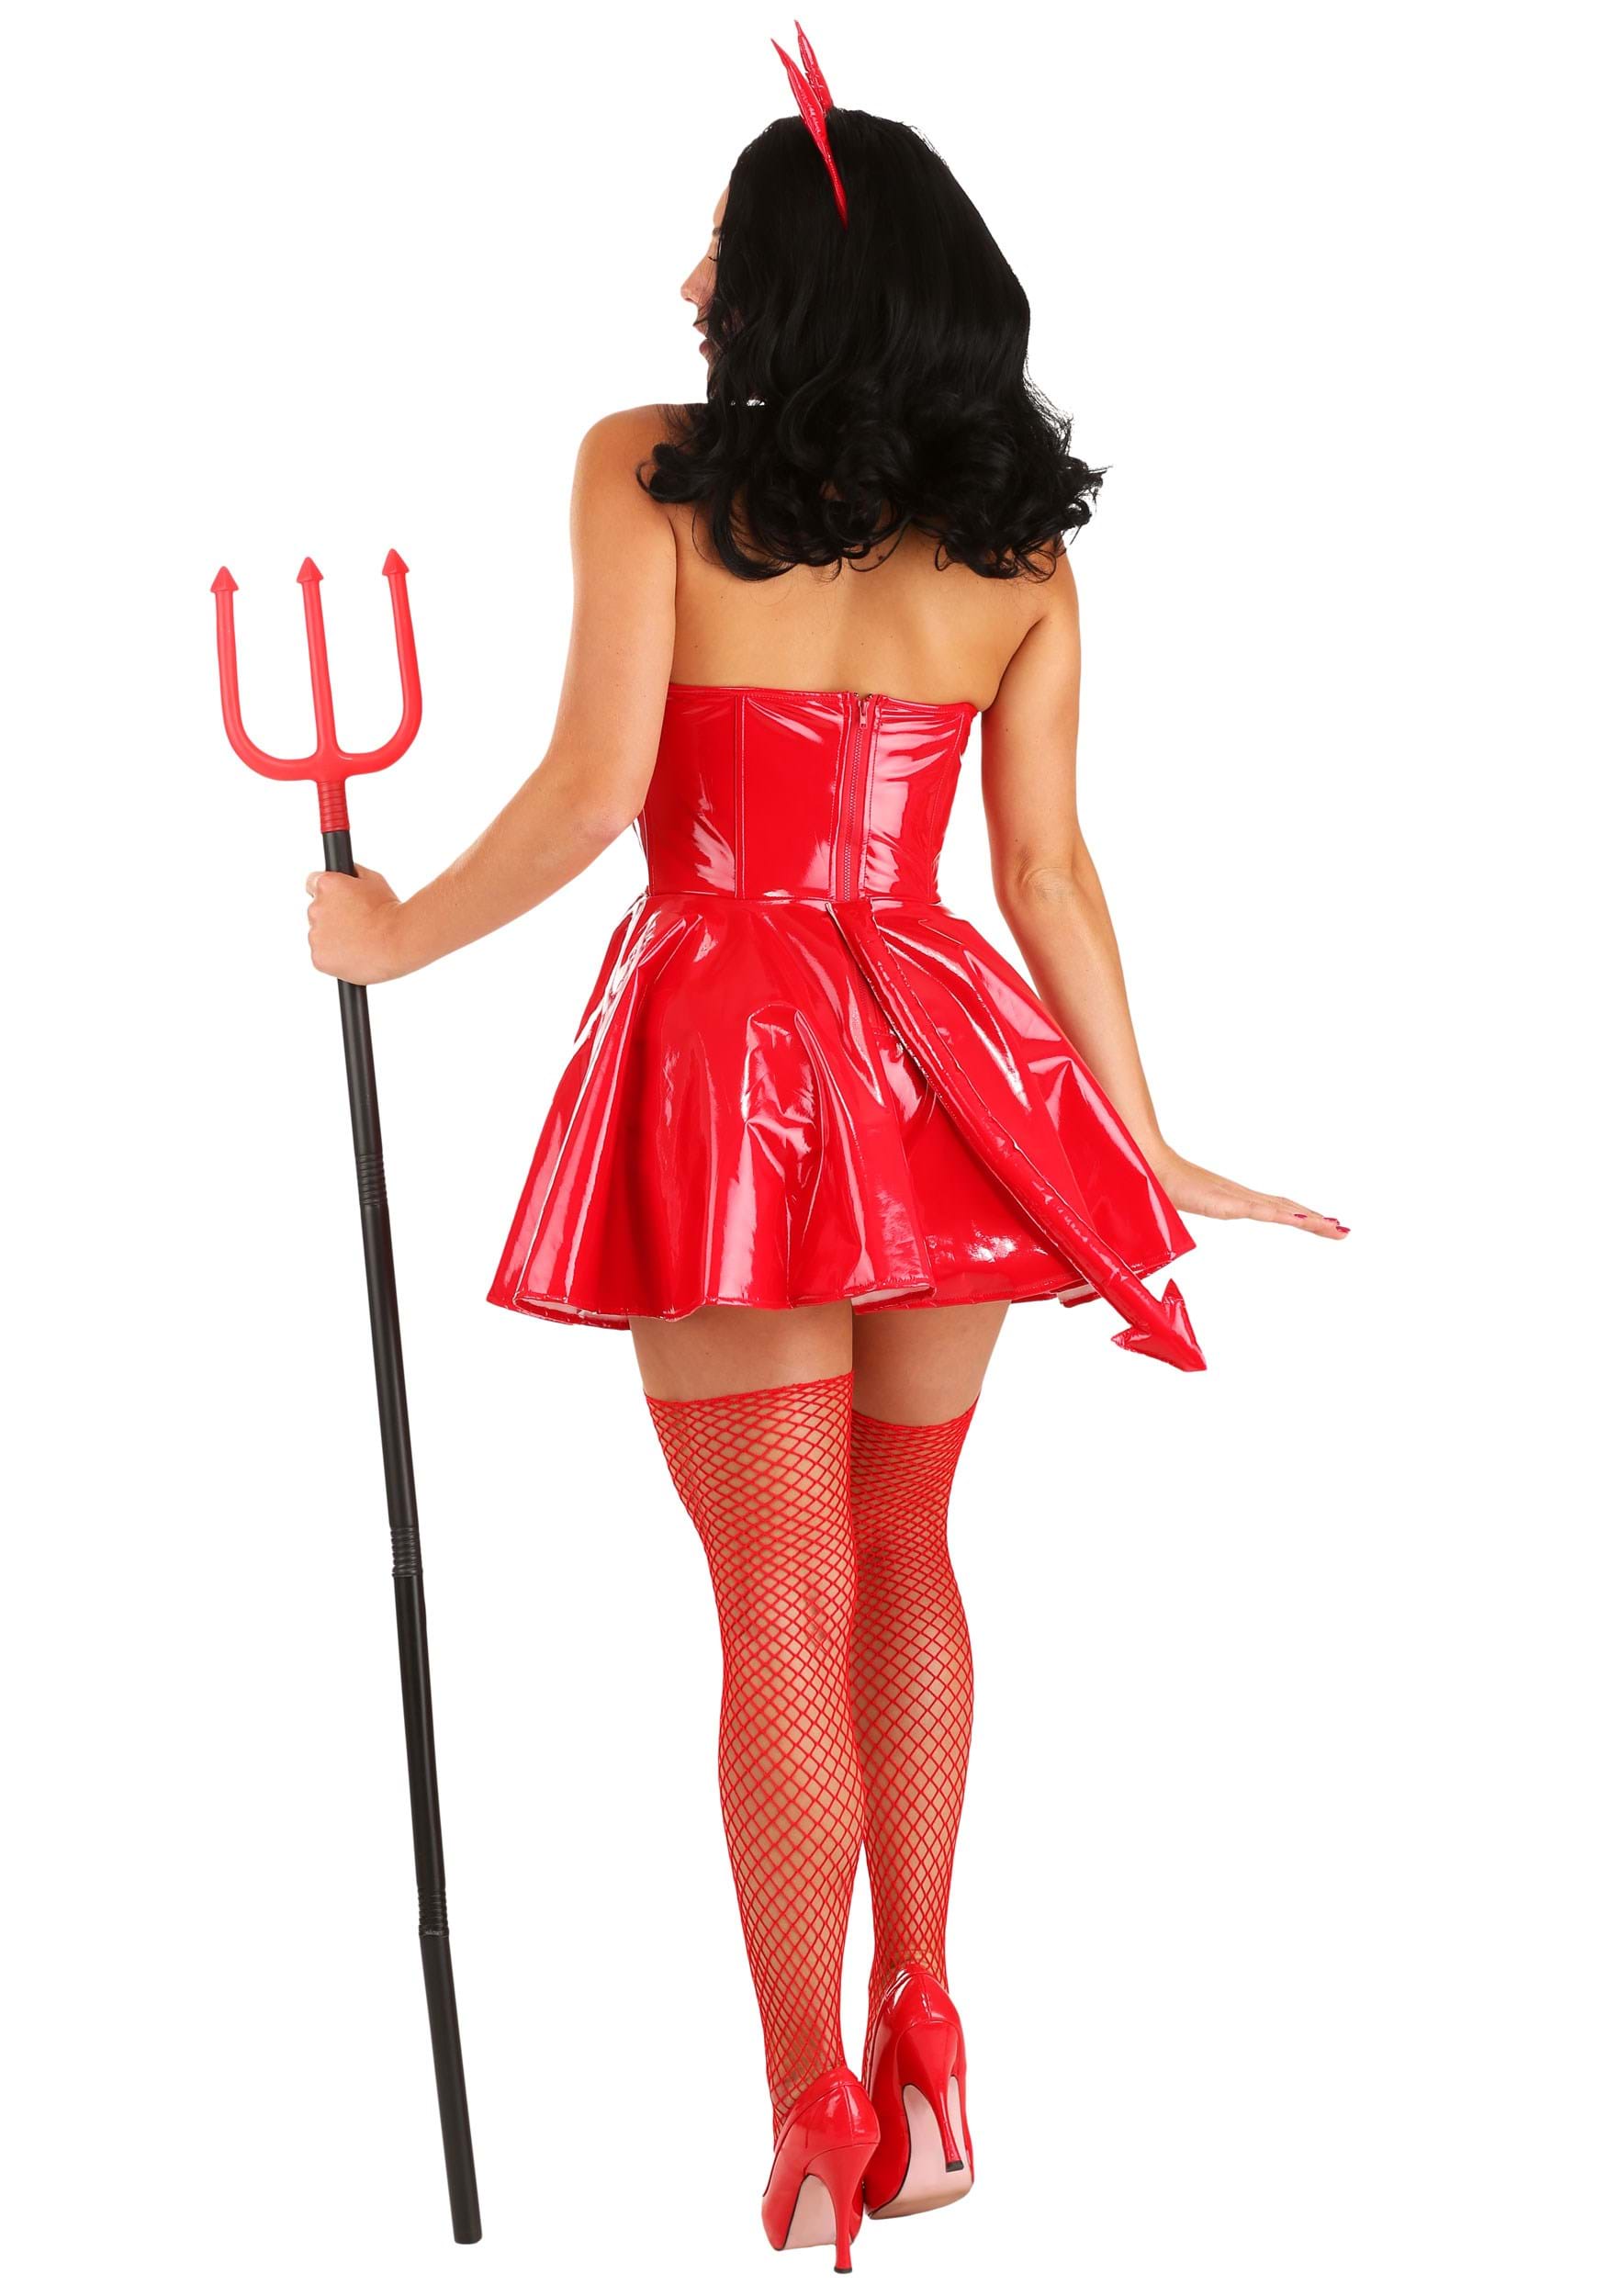 Scary Demon Costume, Sexy Halloween Adult Costume, Halloween Costume Woman,  Sexy Halloween Costume, Sexy Costumes for Women, Fantasy Costume -   Canada